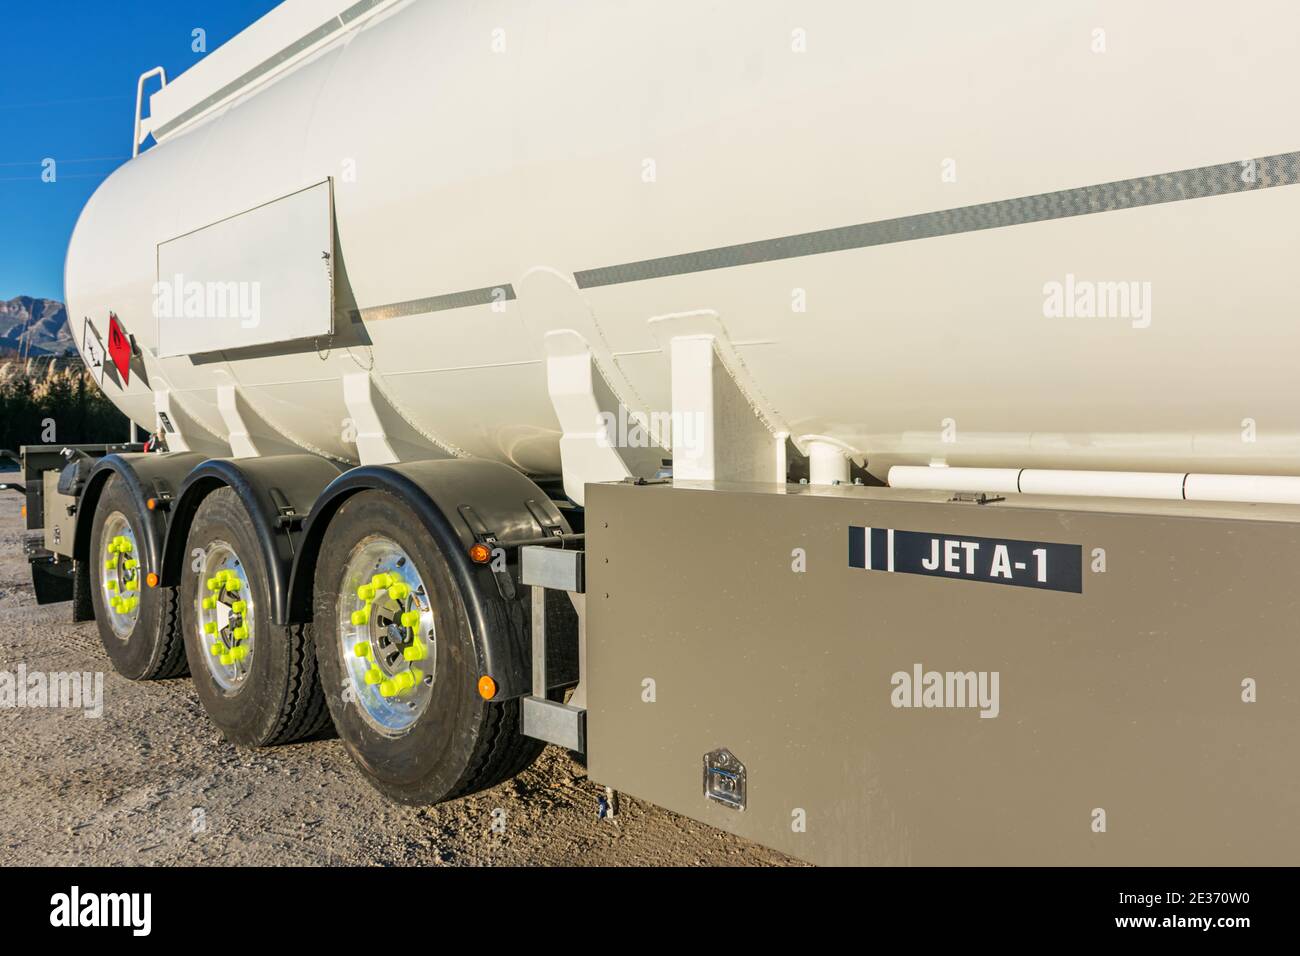 Tank truck to transport Jet A-1 aviation fuel, only and exclusively that type of fuel, for which the vehicle is marked with the name of the fuel in va Stock Photo